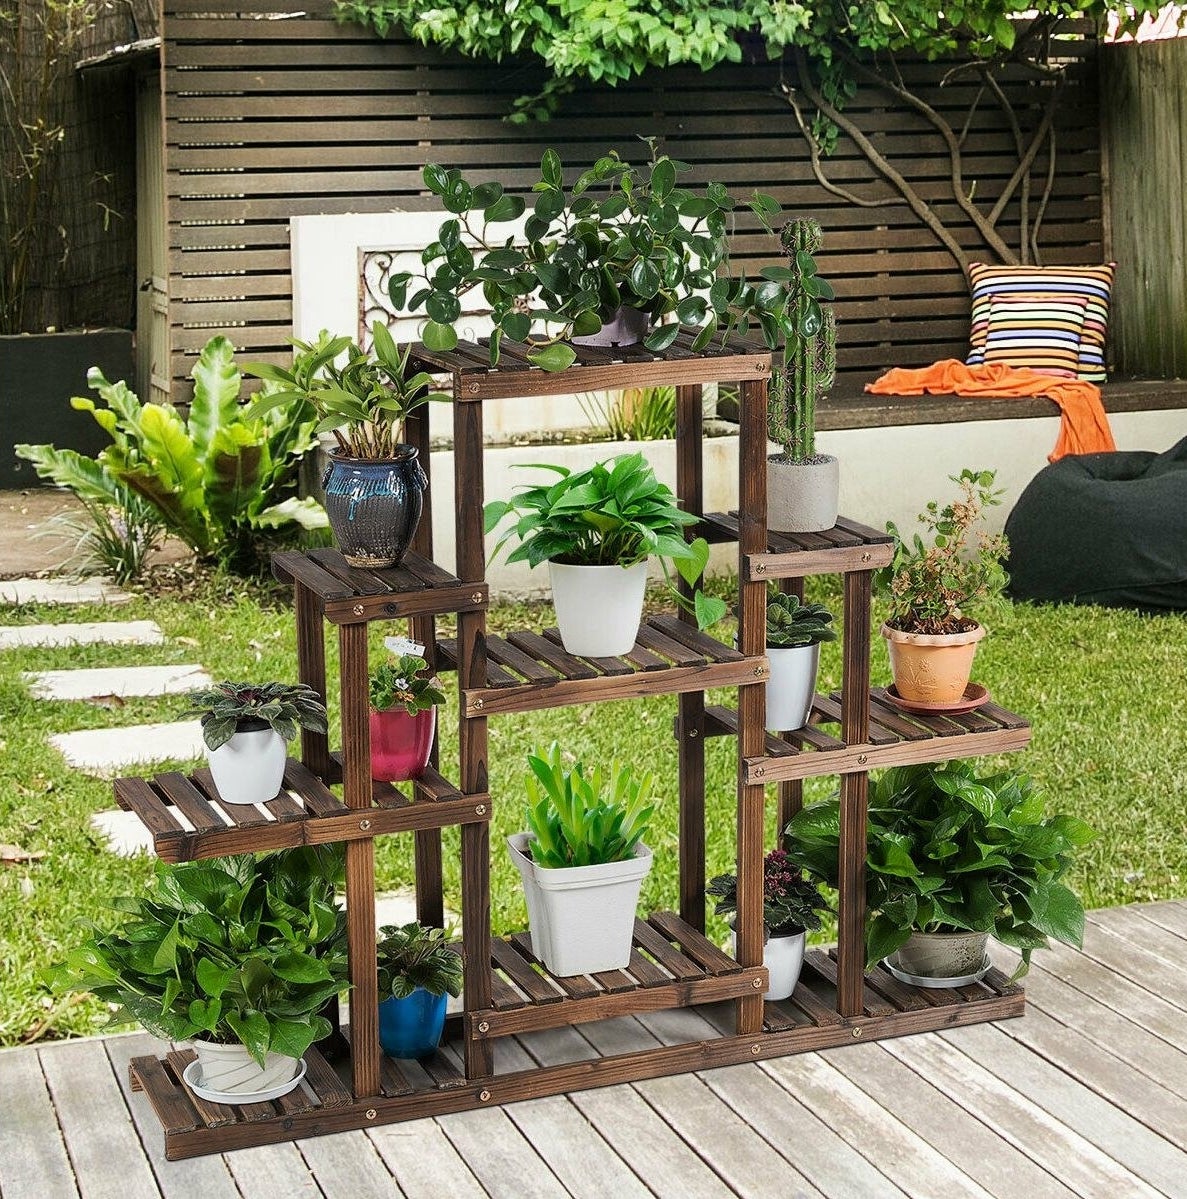 the plant stand outside with several plants on it